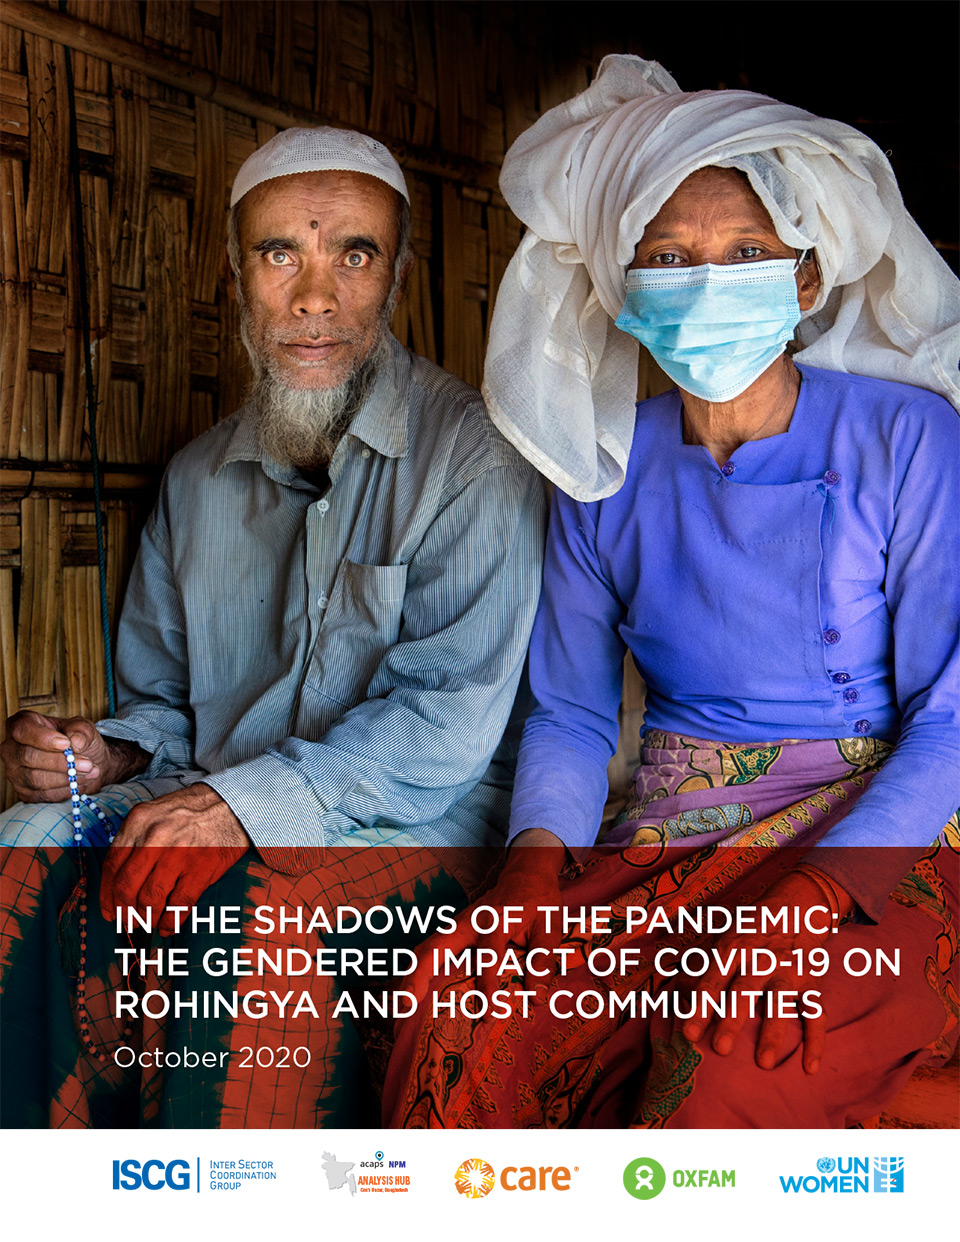 In the shadows of the pandemic: The gendered impact of covid-19 on rohingya and host communities